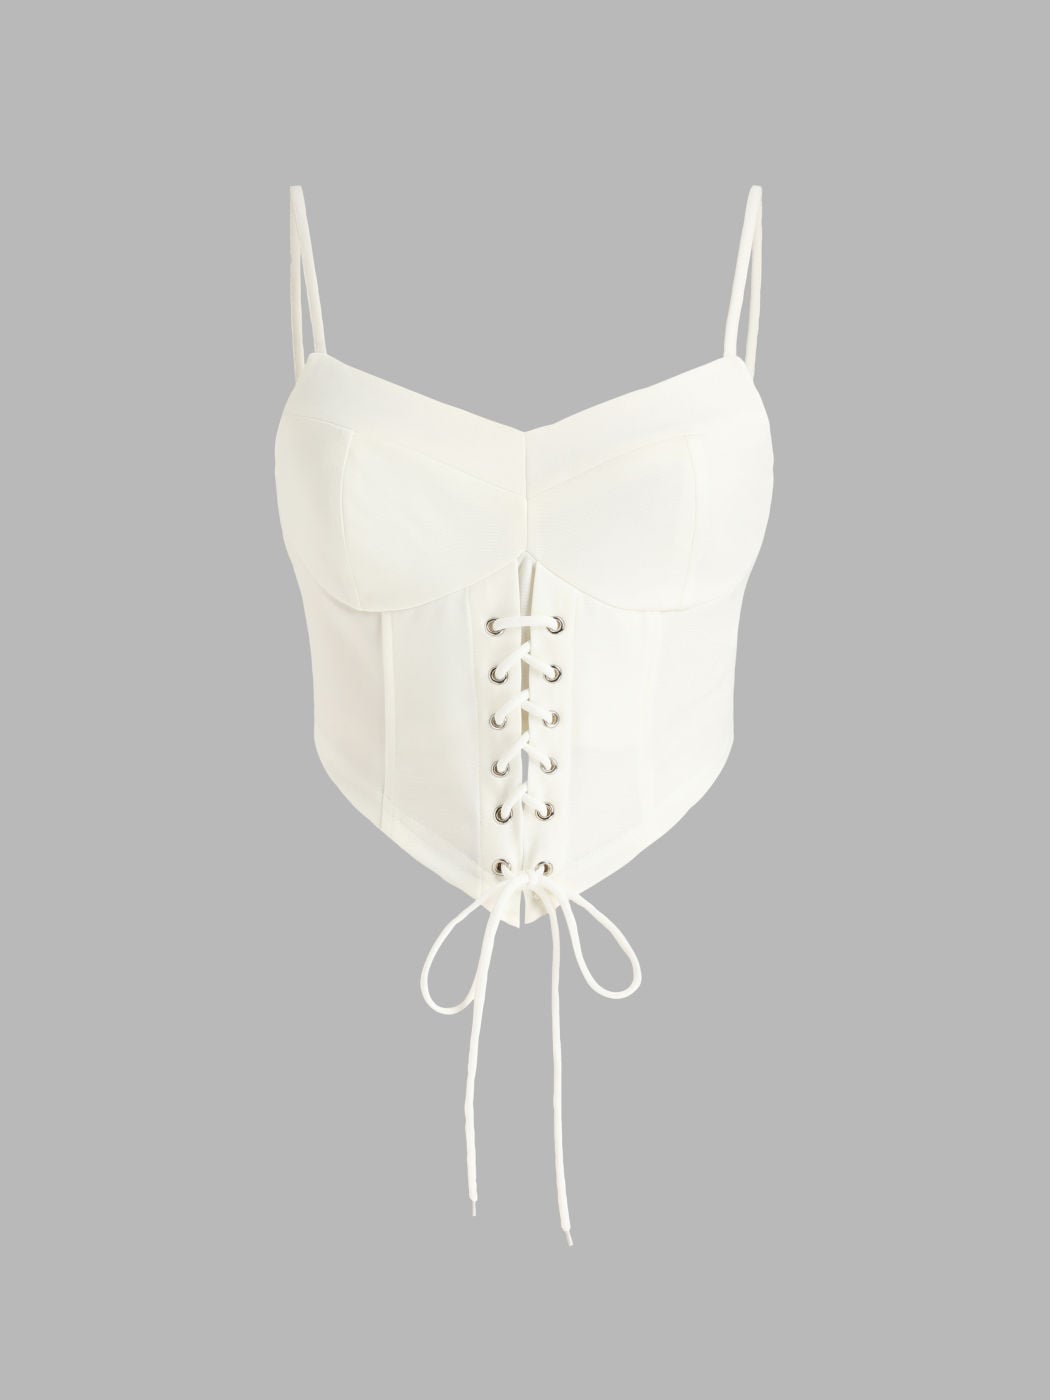 White Lace-Up Corset - Spencer's